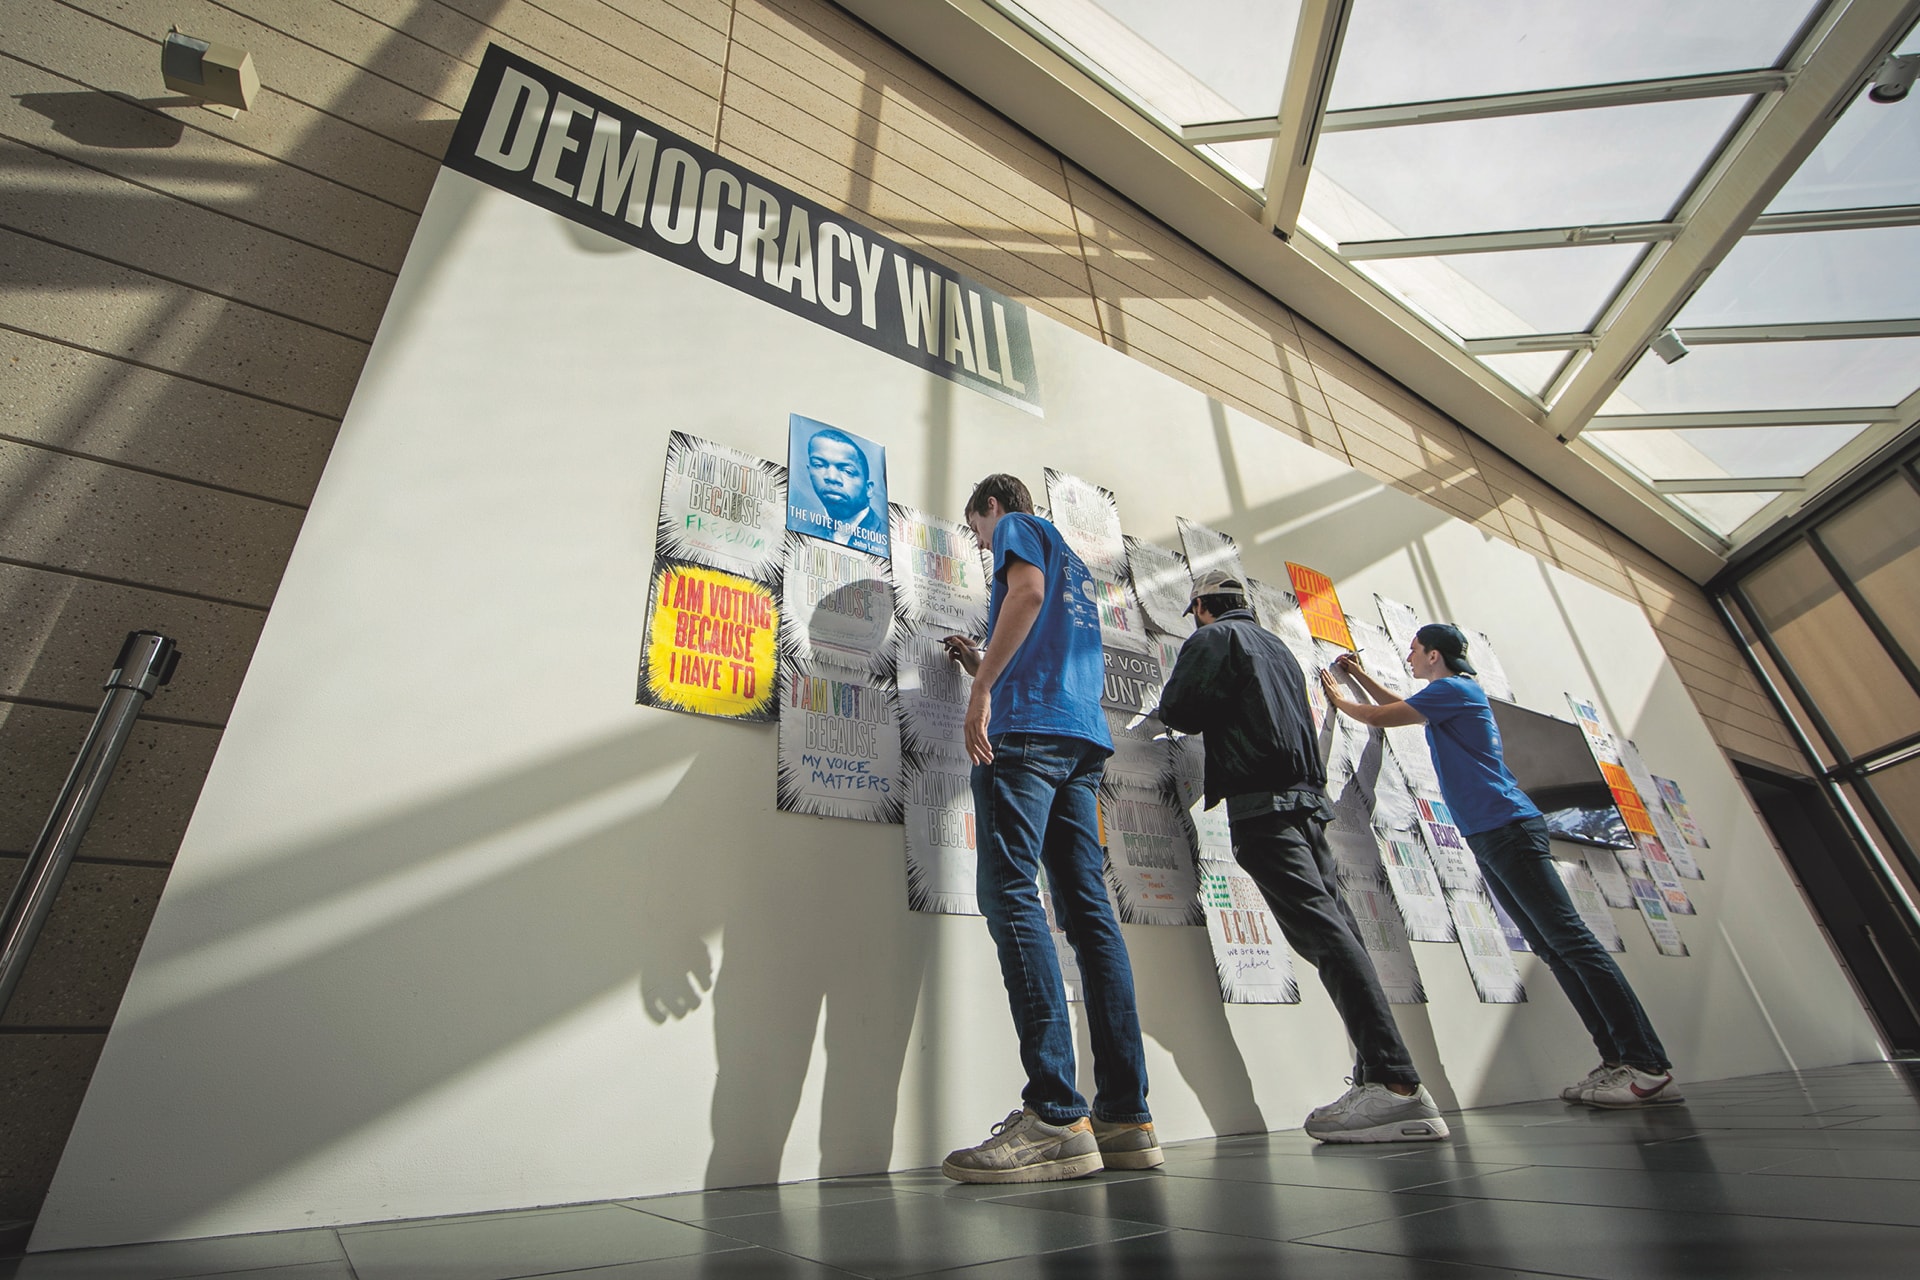 Students add their posters to the Democracy Wall at the Nasher Museum. Photo by Chris Hildreth